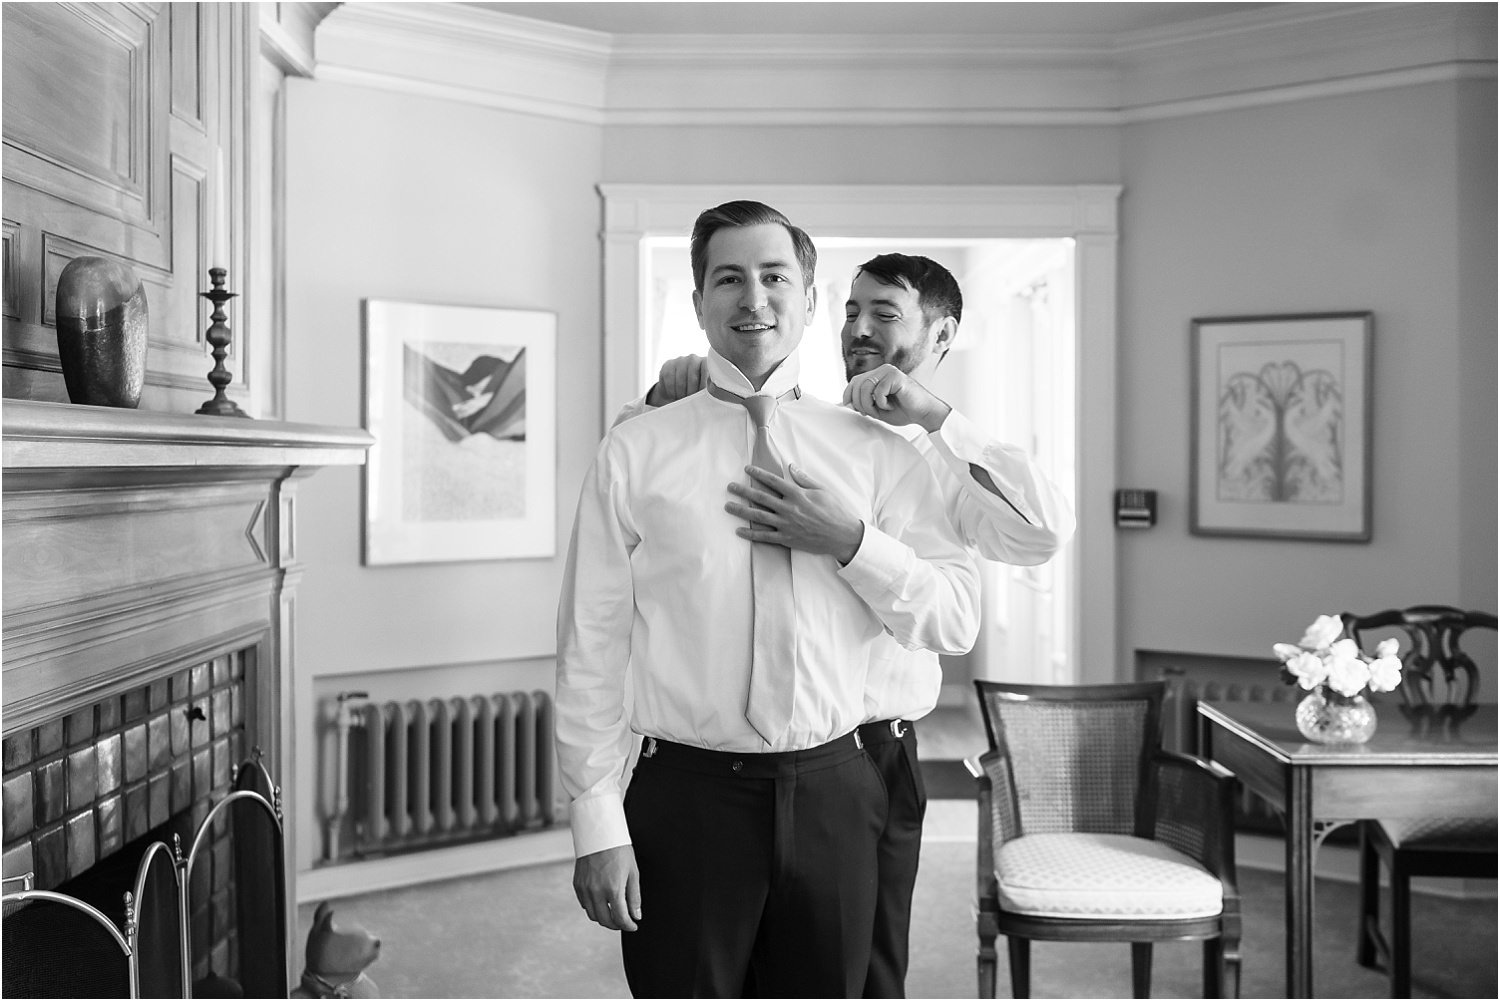  A best man helps his cousin, the groom, get dressed before his ceremony.  